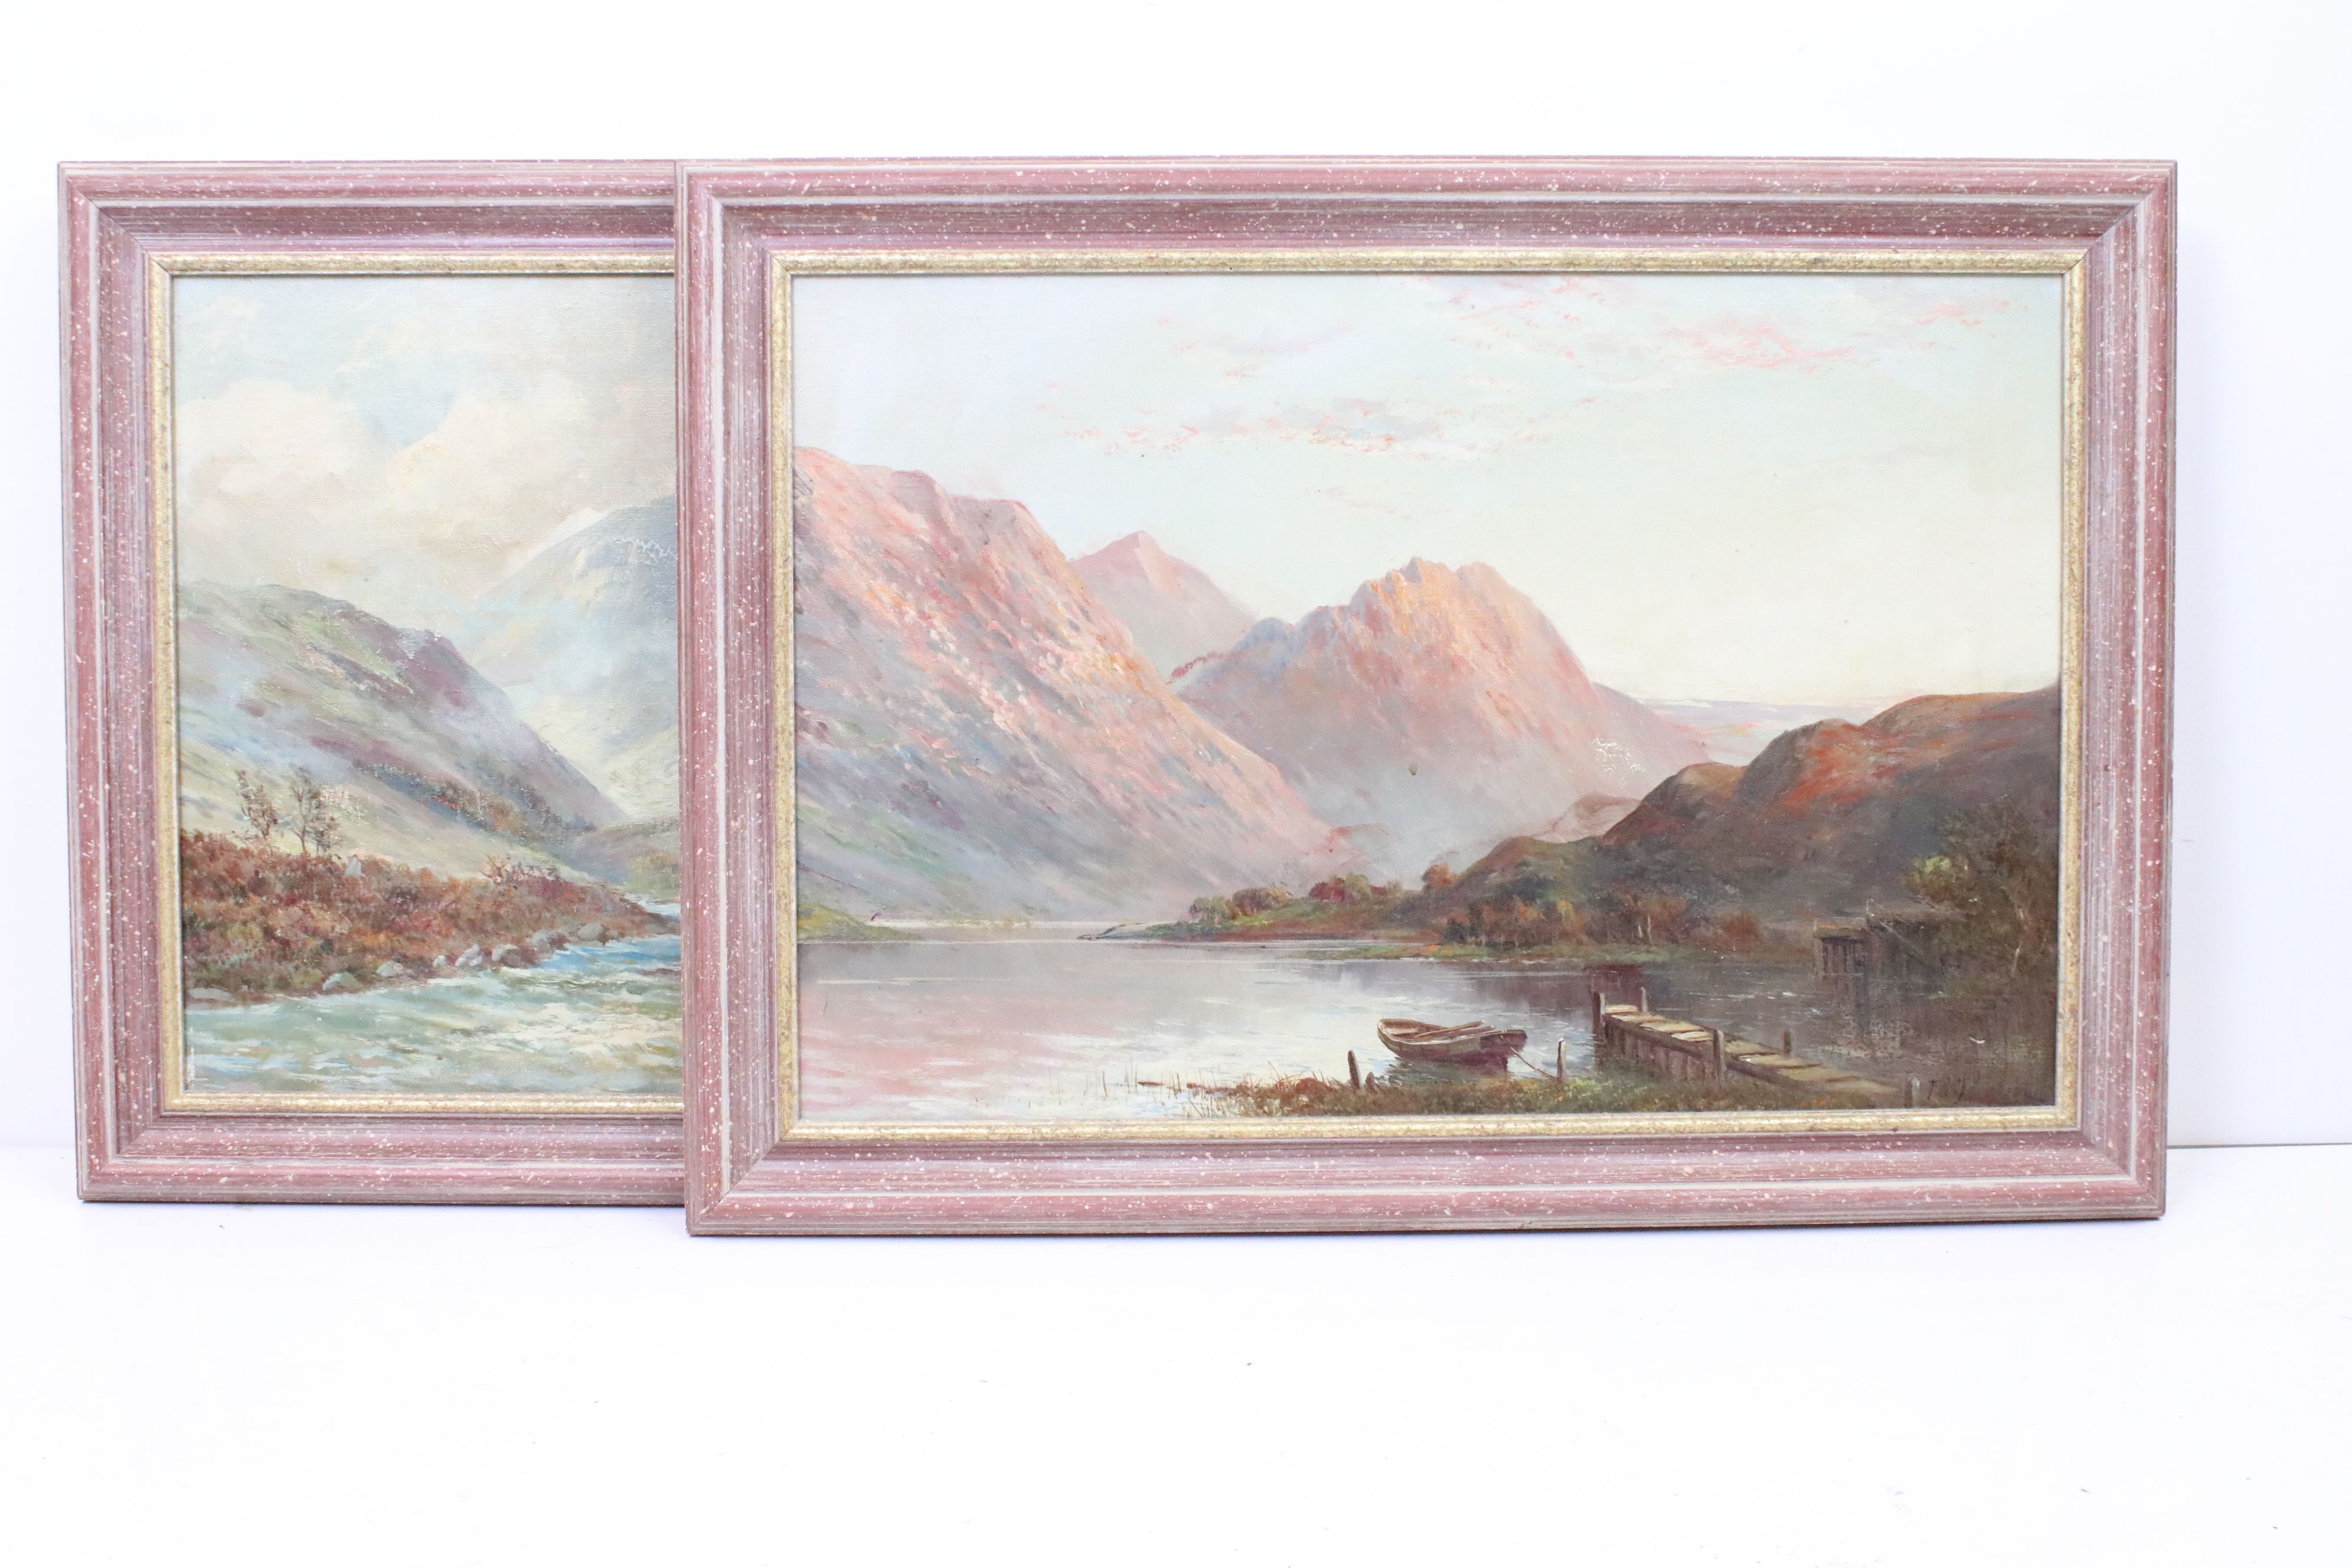 F E Jameson (British Late 19th / Early 20th century) Pair of Landscape Oil Paintings on Canvas of